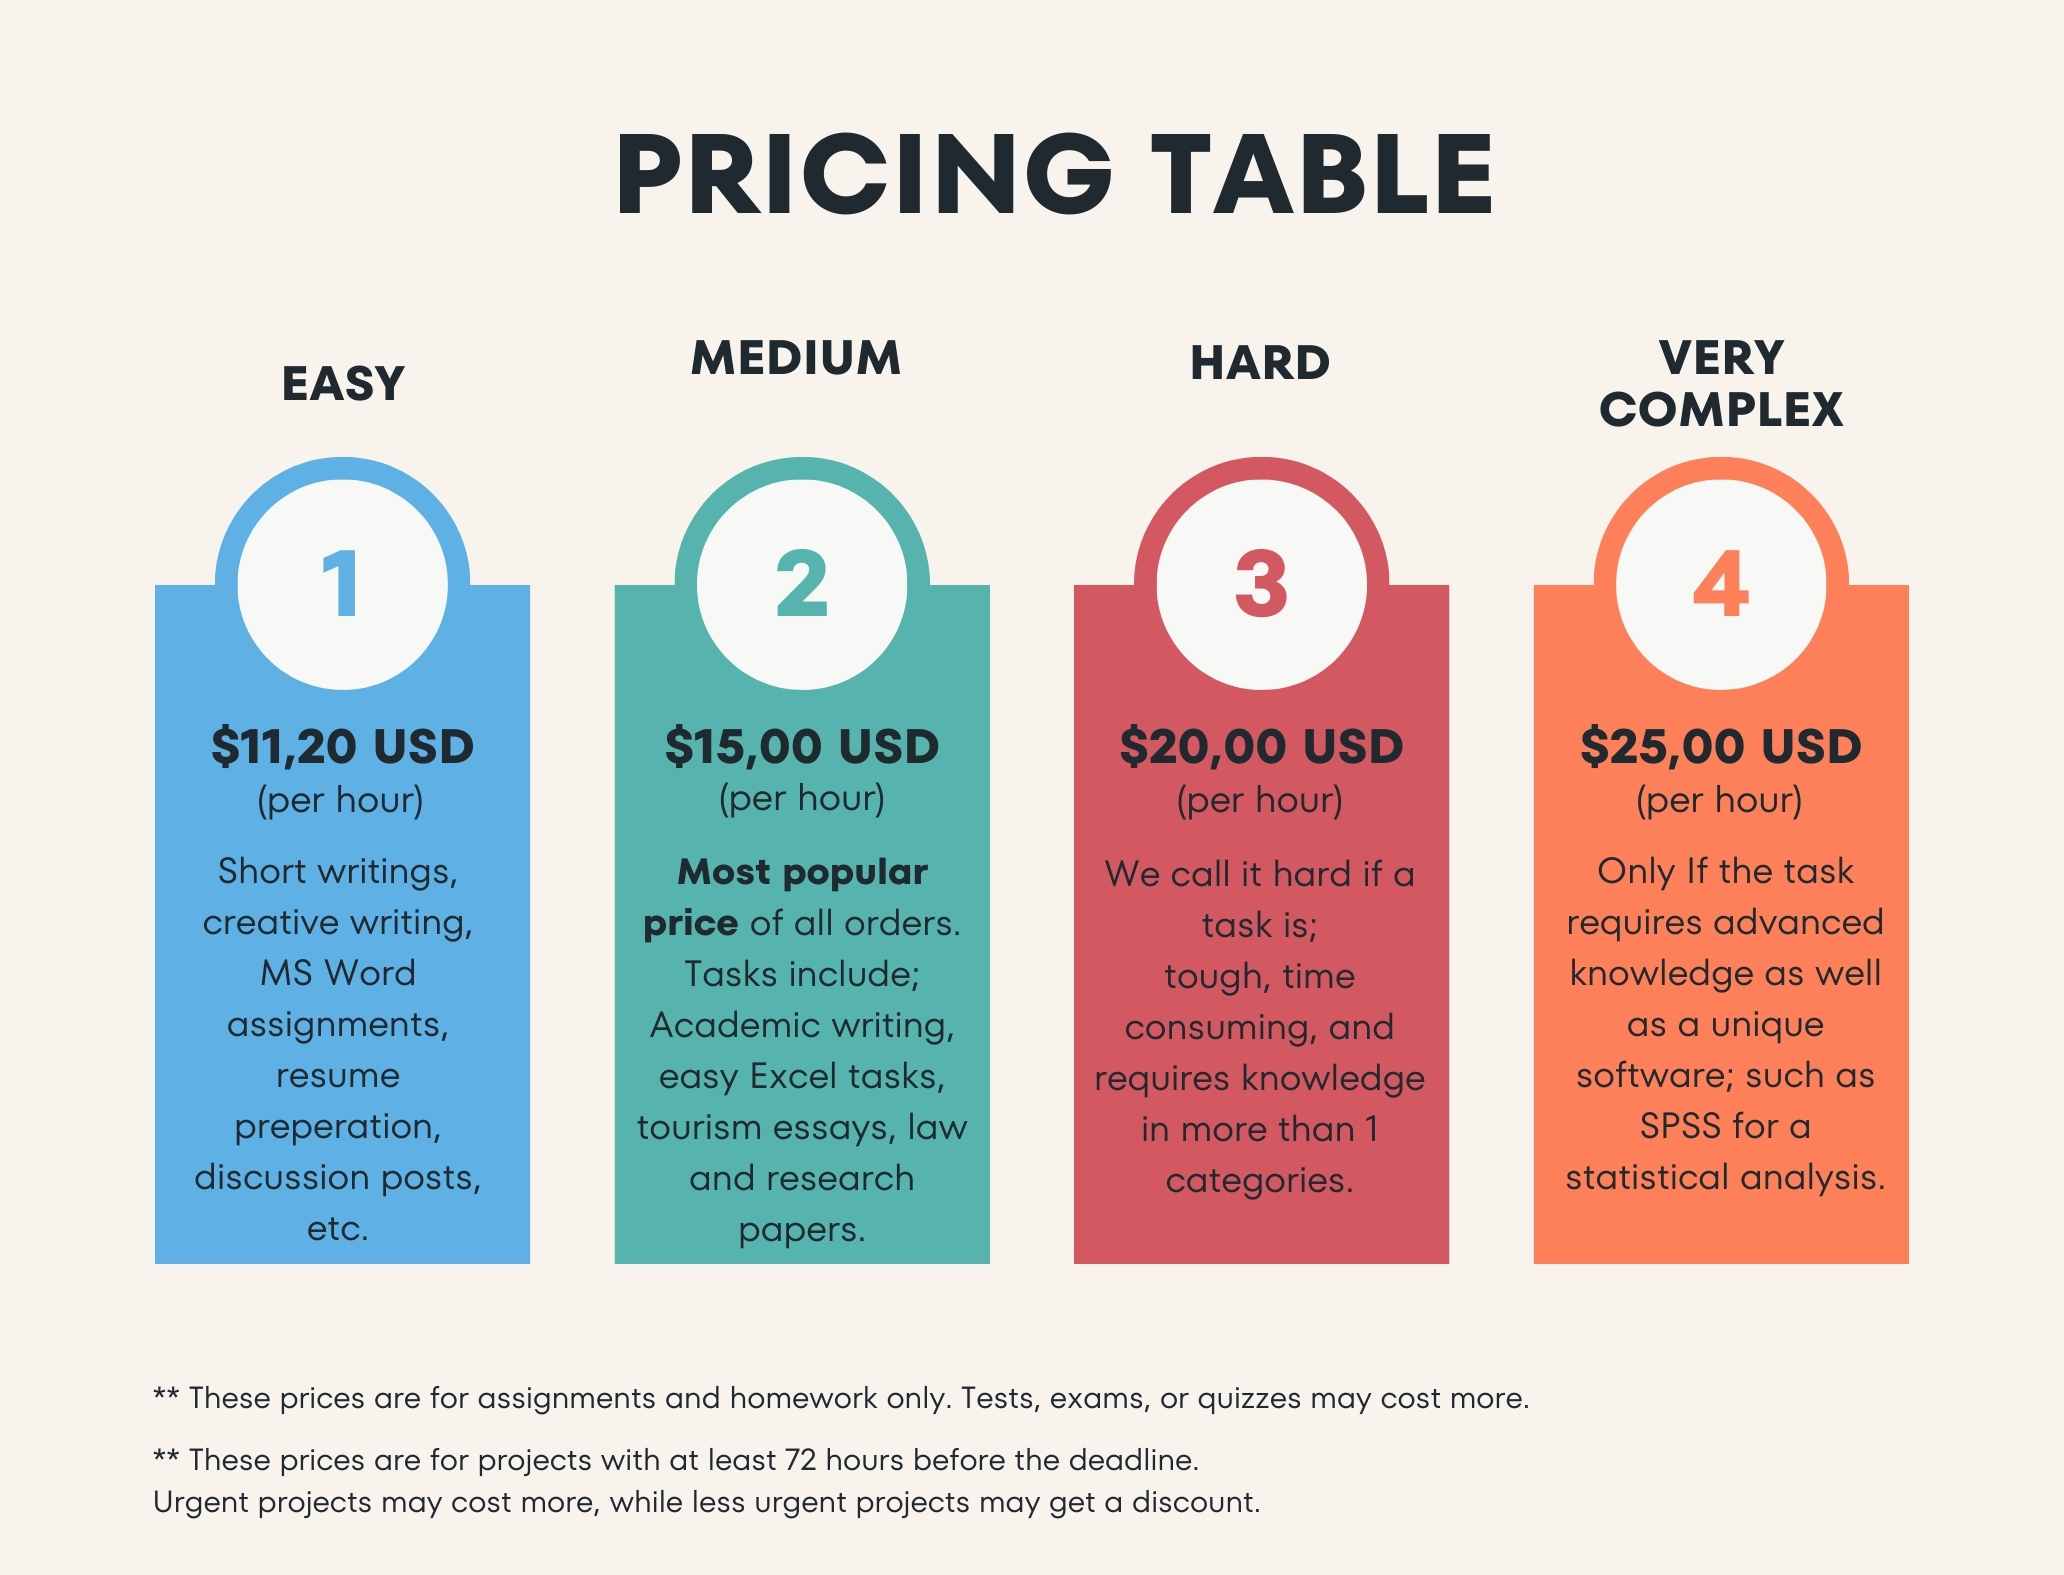 pricing table for assignment help categories. 11.2USD, 15,20 and 25 USD respectively for Easy,medium,hard and very complex.